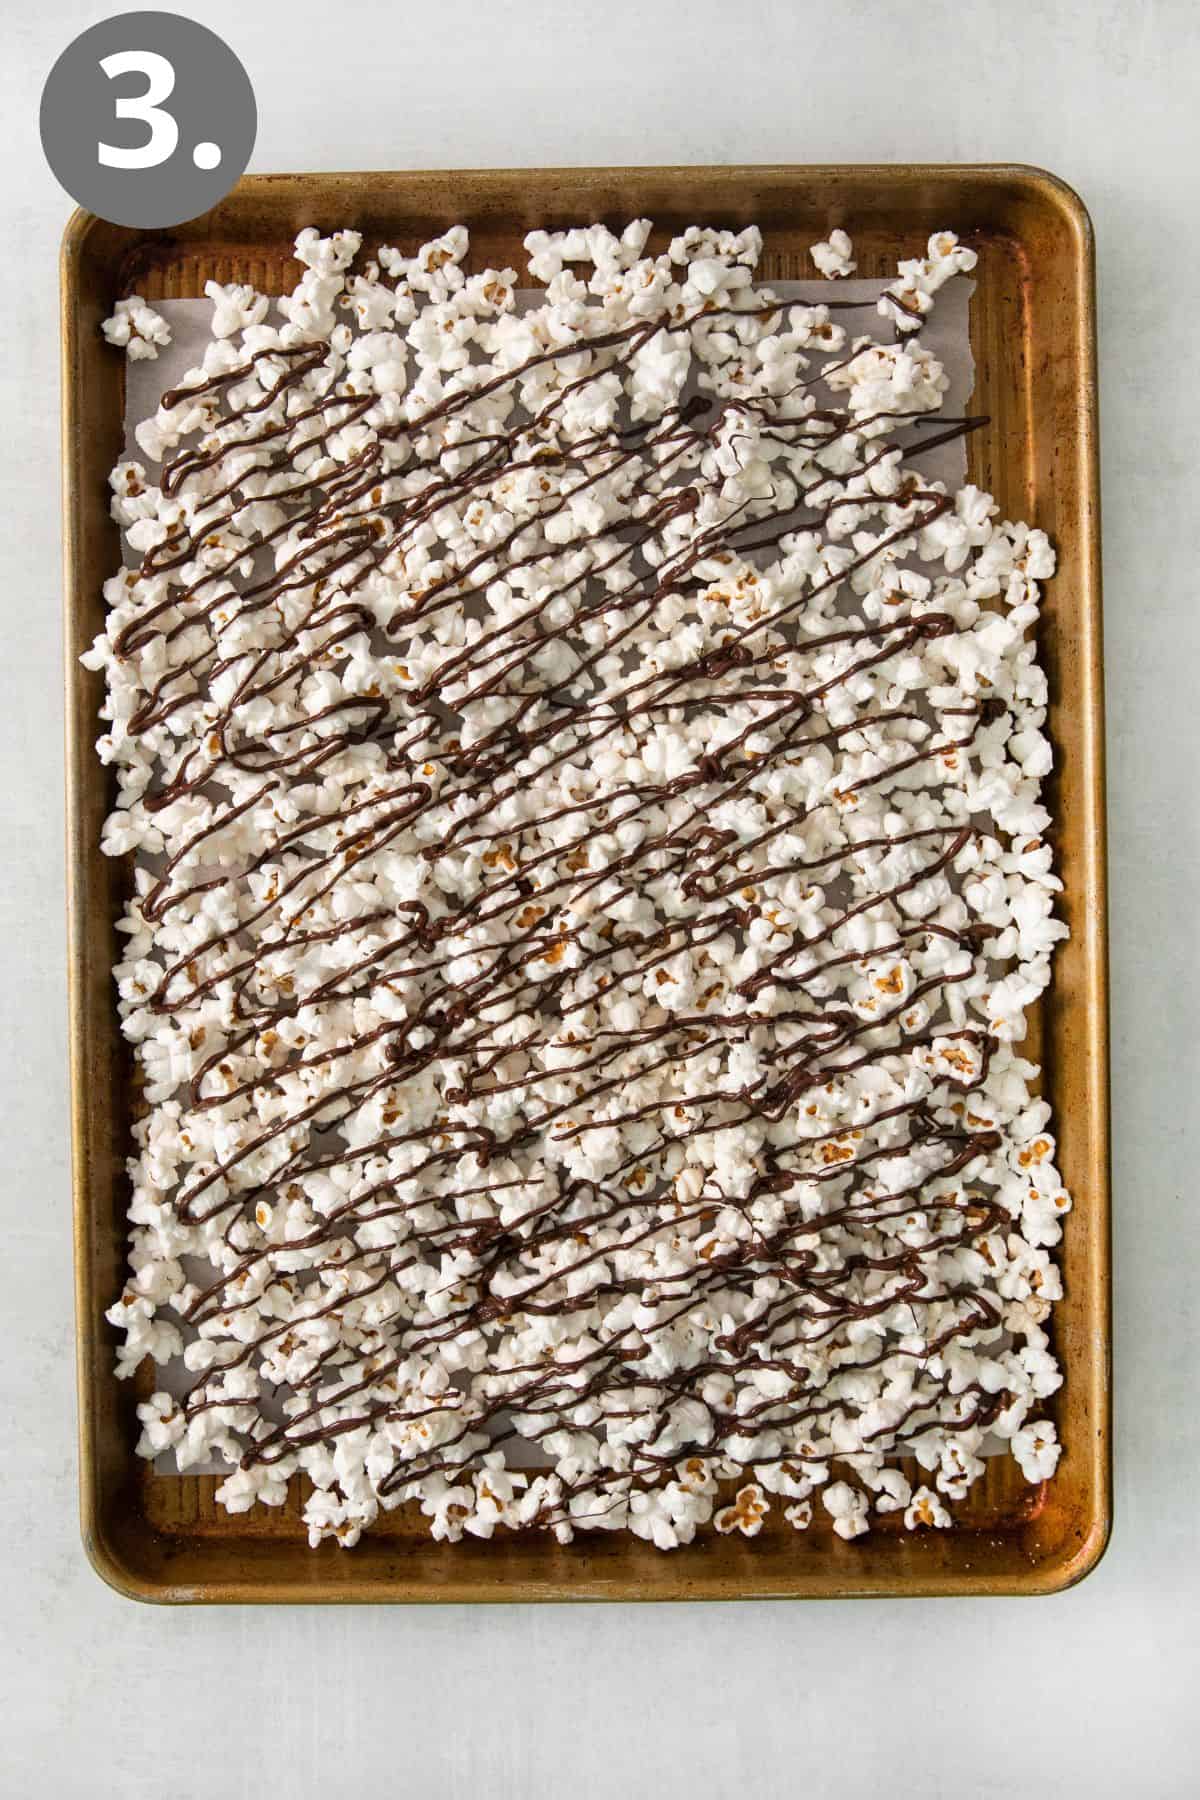 Chocolate drizzle popcorn on a baking sheet